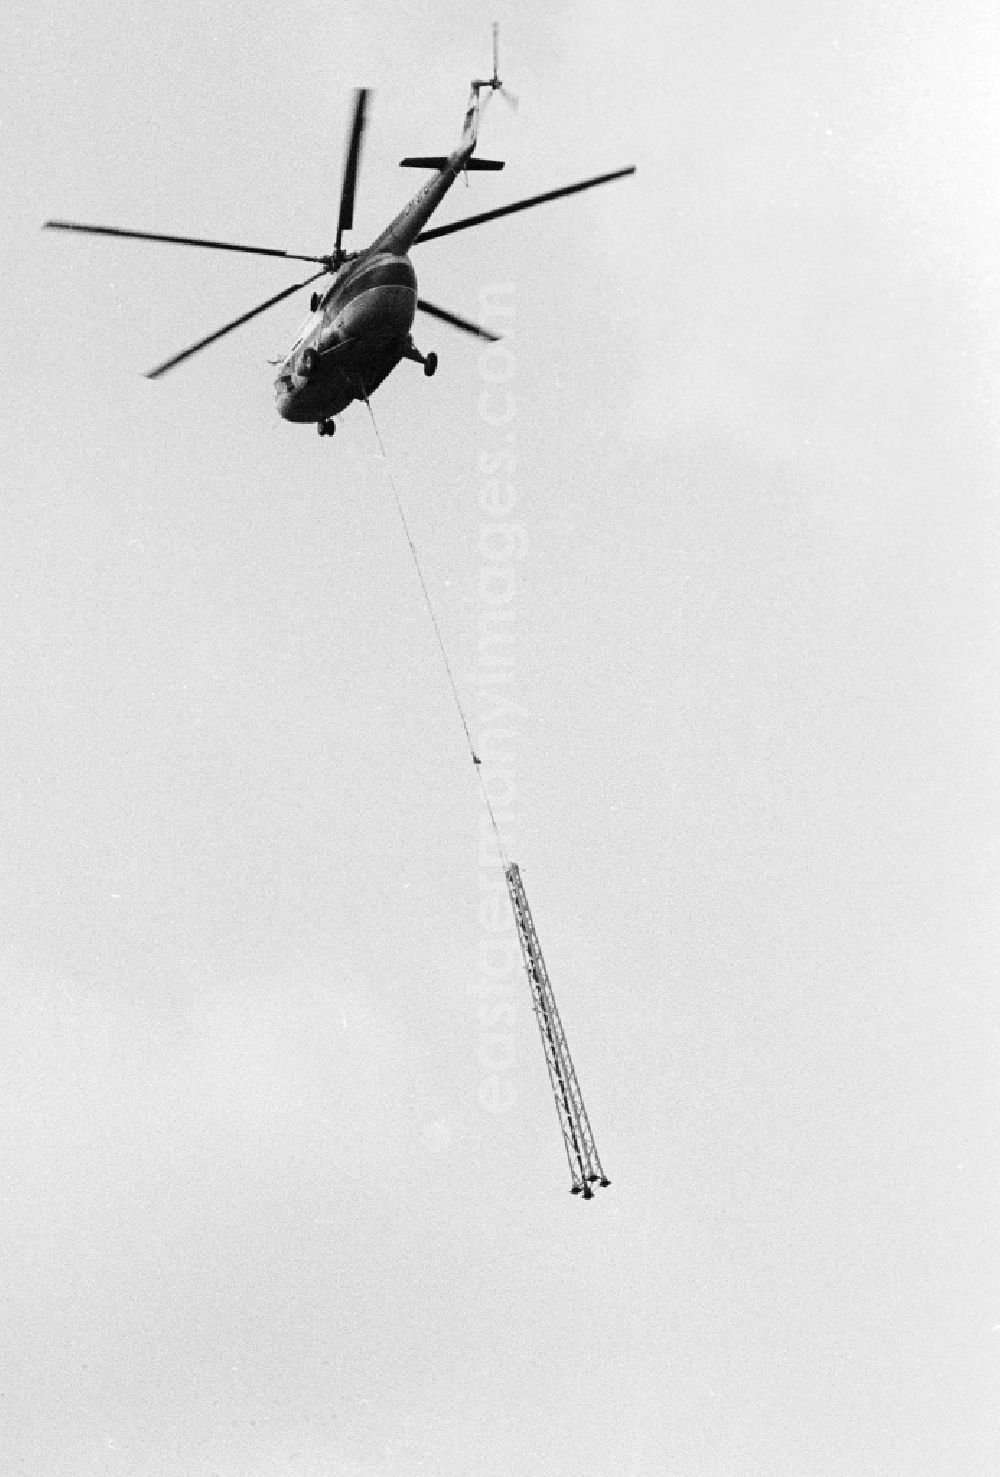 Seddiner See: A transport helicopter of the type Mi8 transports driving poles in Seddiner See in the federal state Brandenburg in the area of the former GDR, German democratic republic